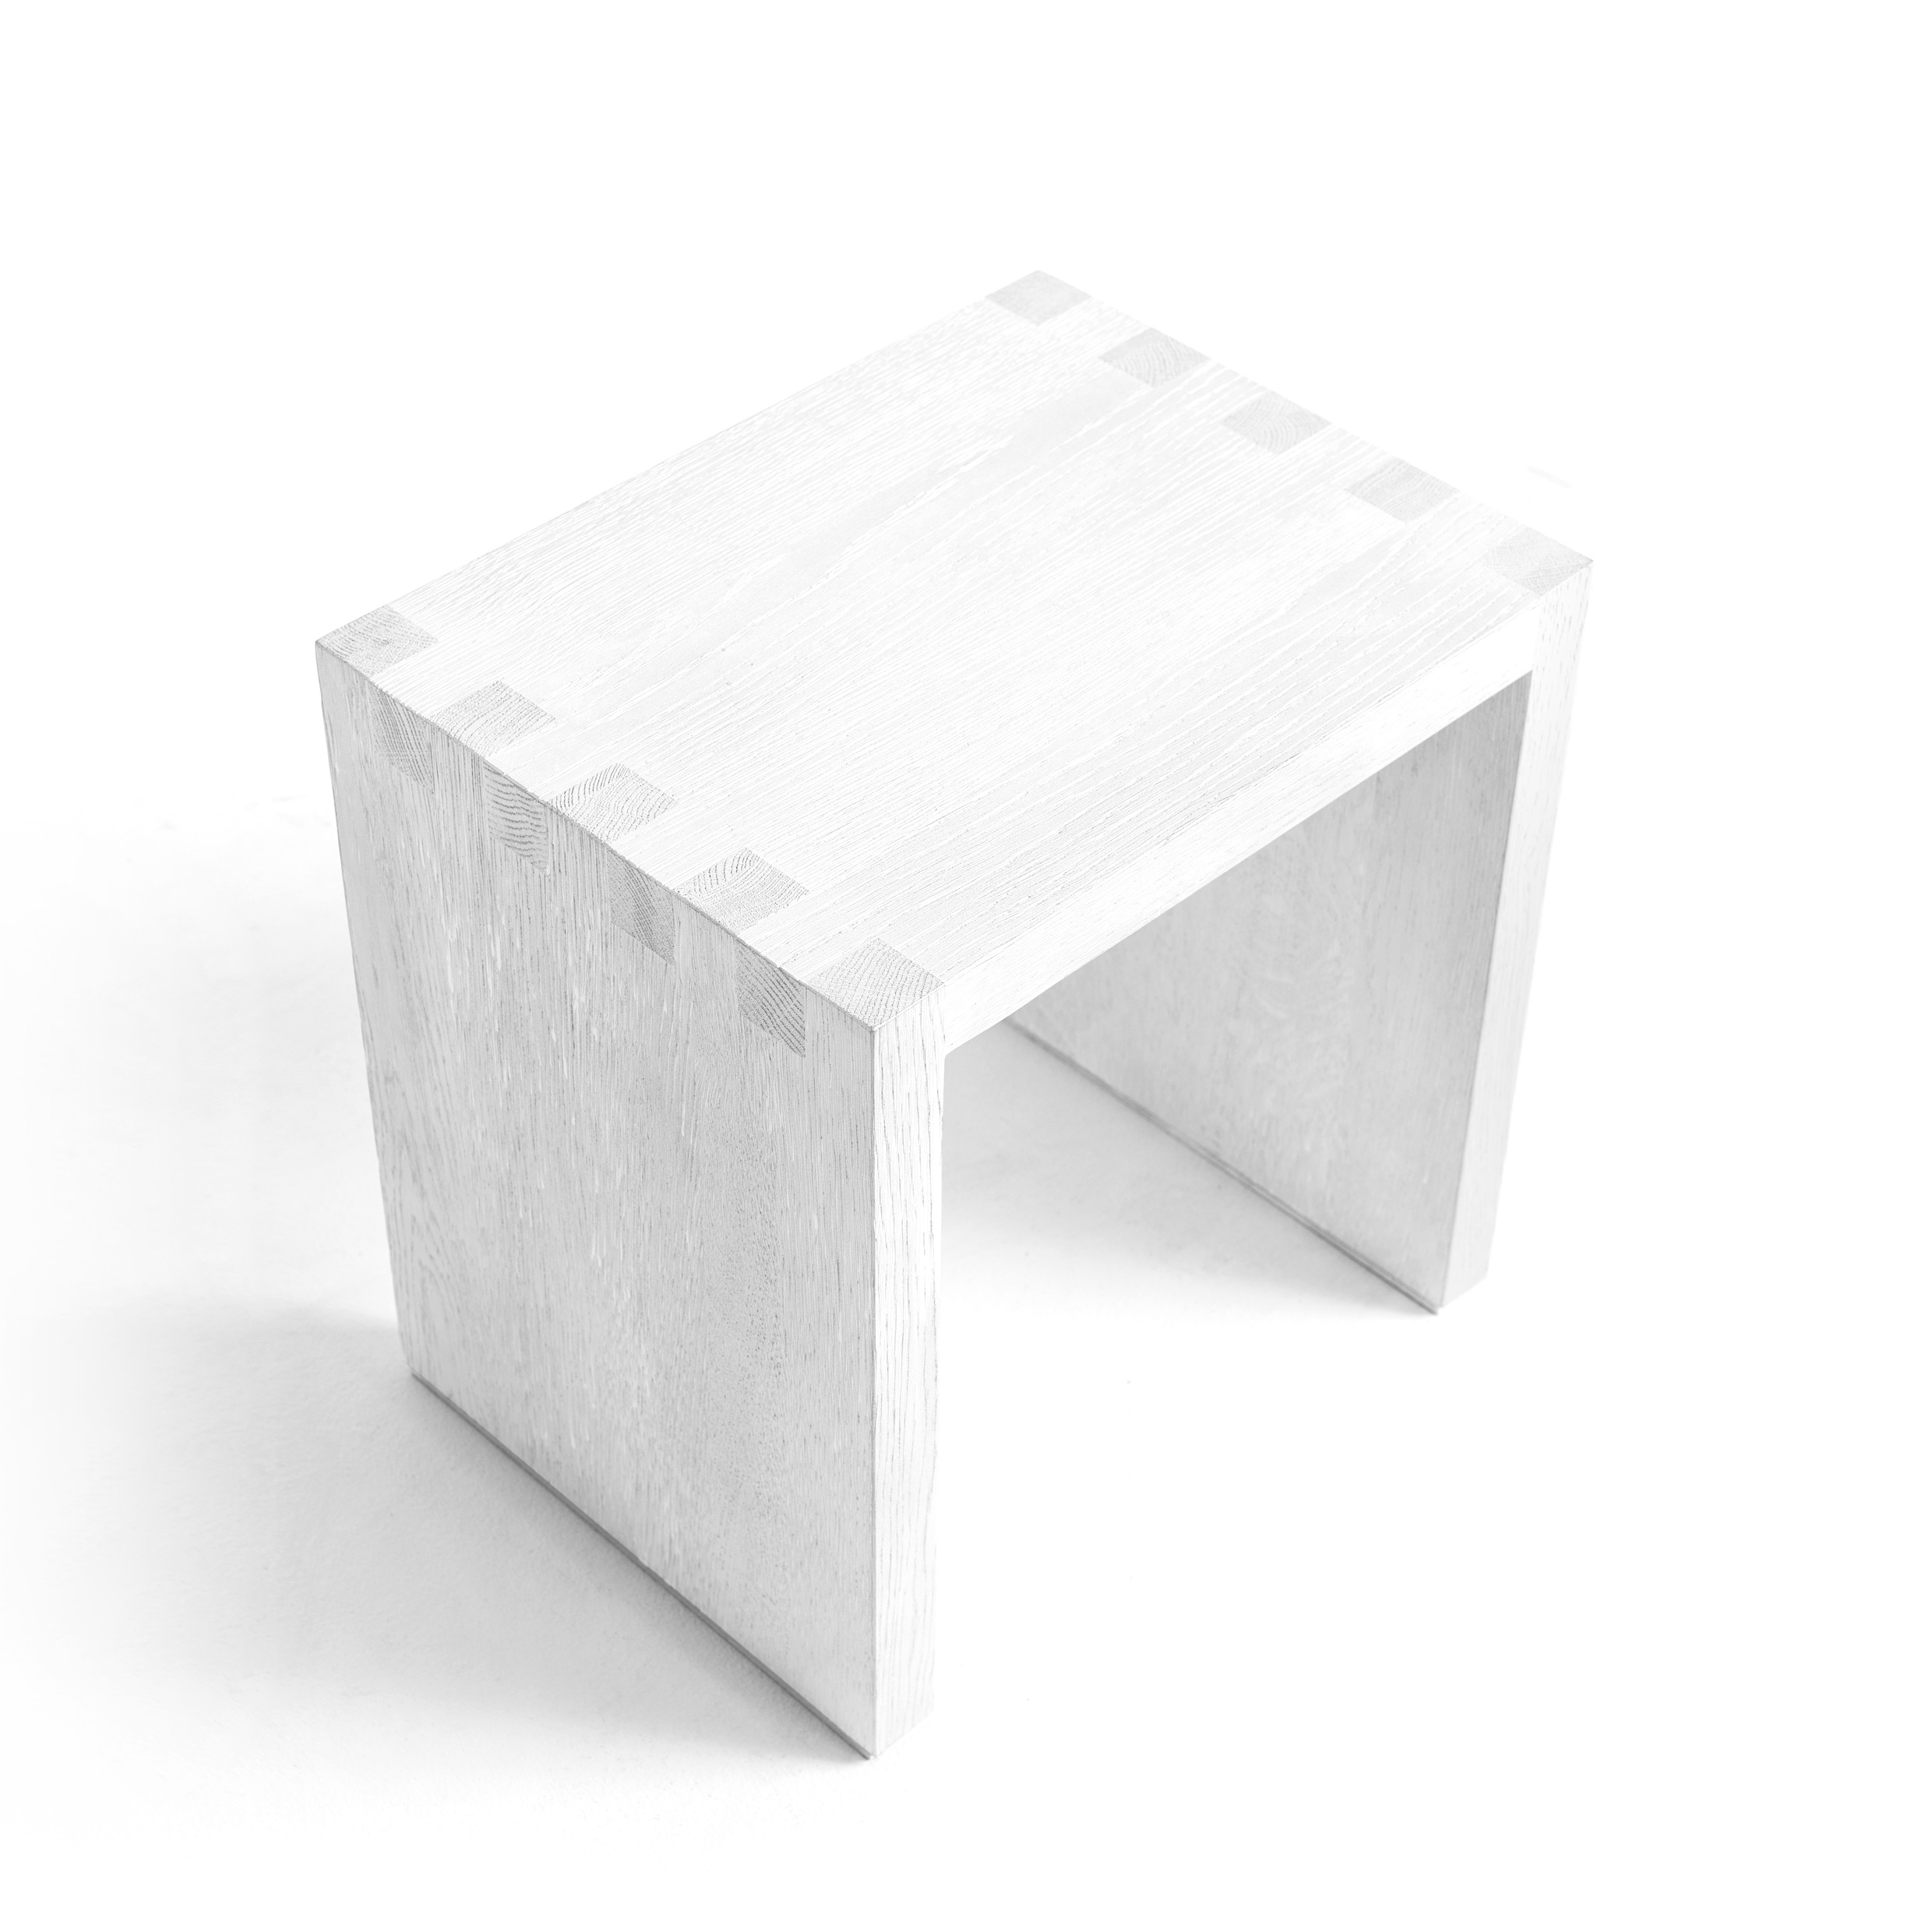 FORM EXCLUSIVE // BERTRAM - SIDE TABLE | SOLID OAK | PRONG CONNECTION - OAK // WHITE OILED